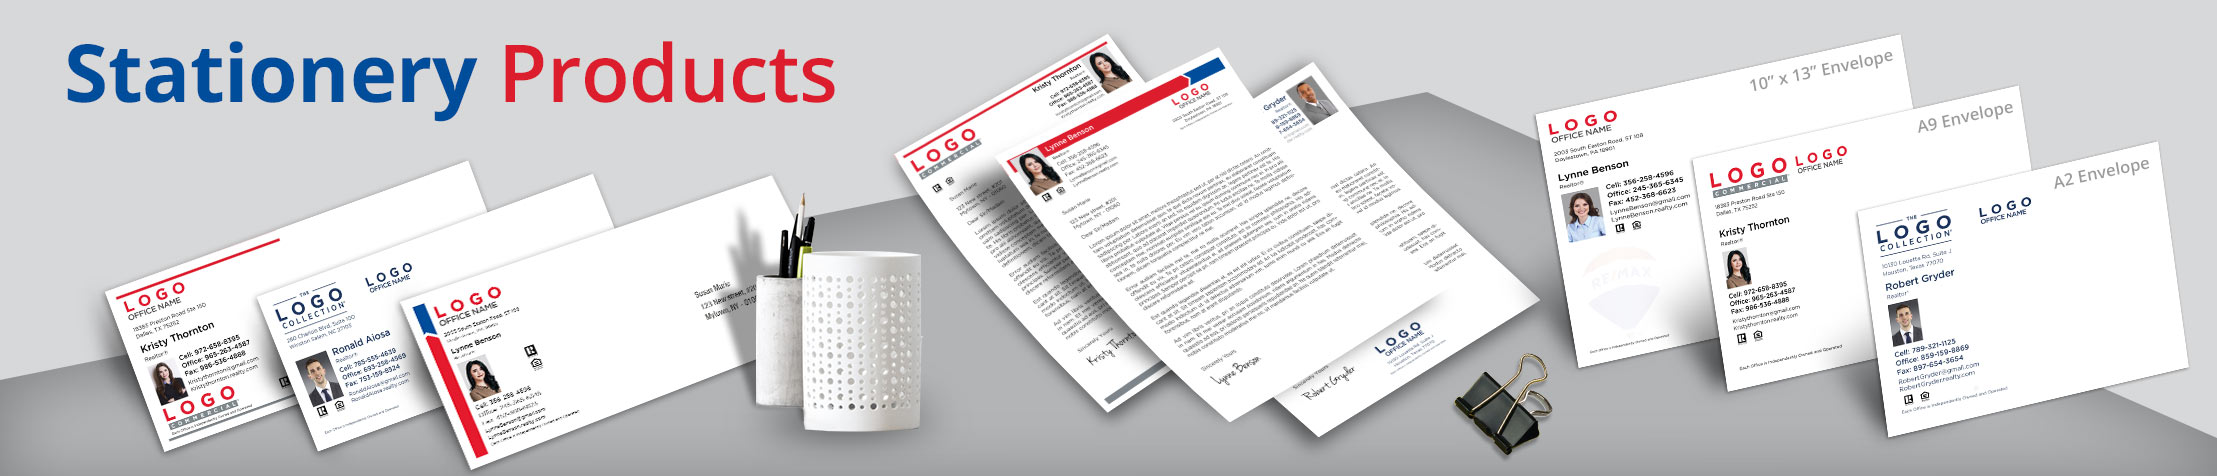 RE/MAX Real Estate Stationery Products - pproved Vendor - Custom Letterhead & Envelopes Stationery Products for Realtors | BestPrintBuy.com